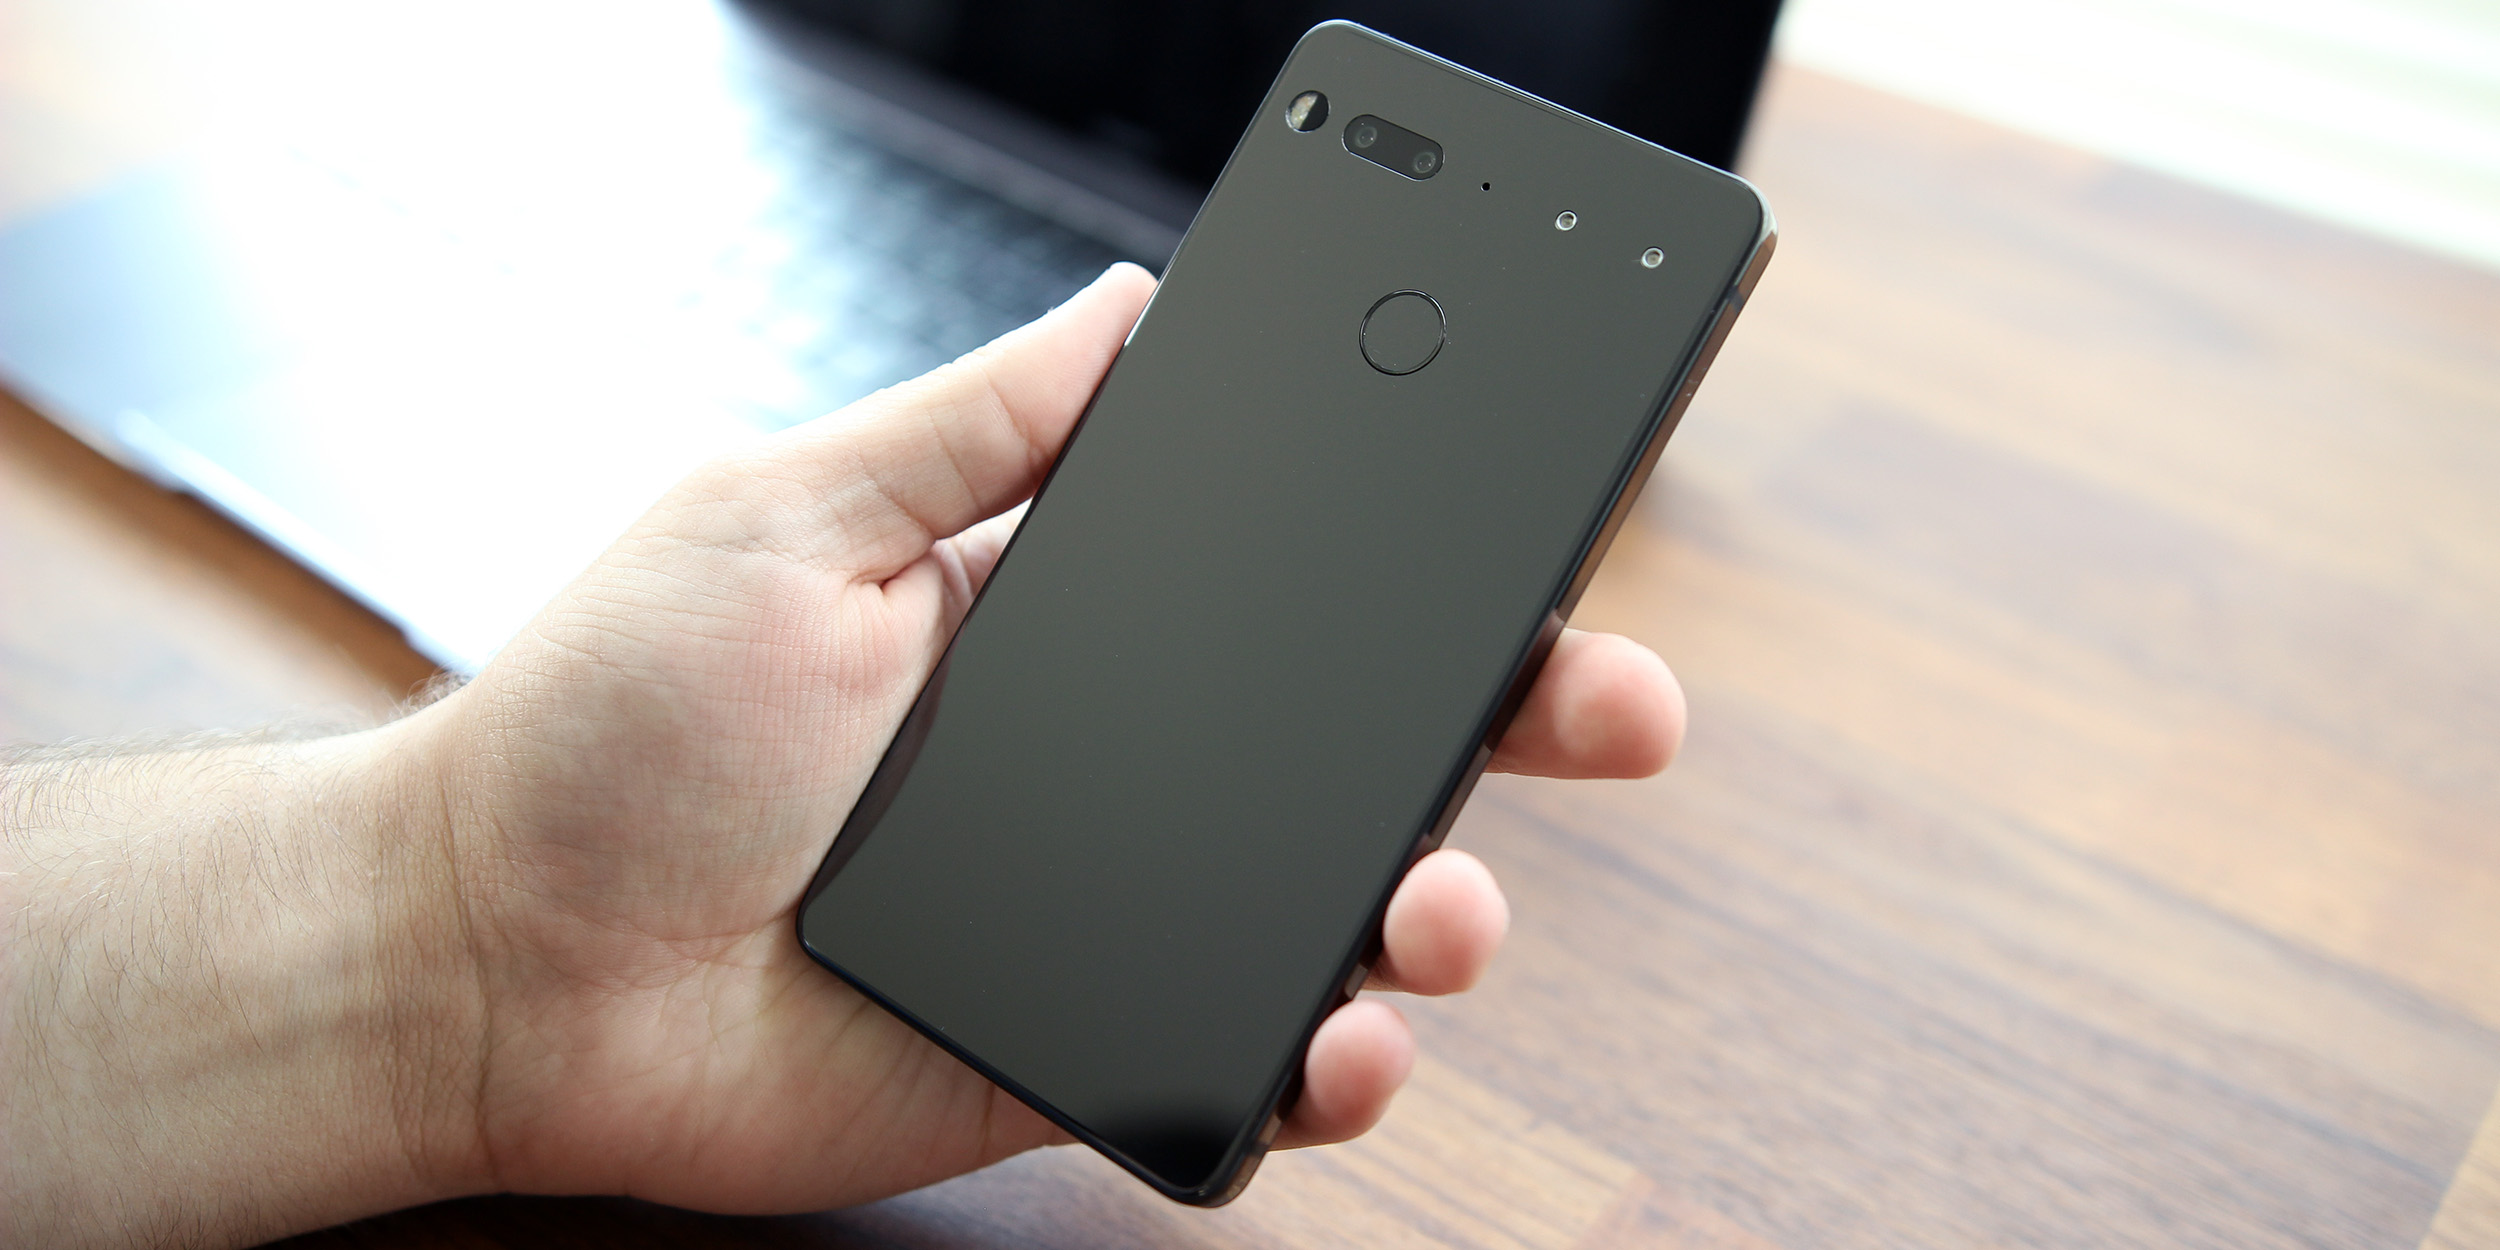 Essential confirms second device, probably a new phone 9to5Google